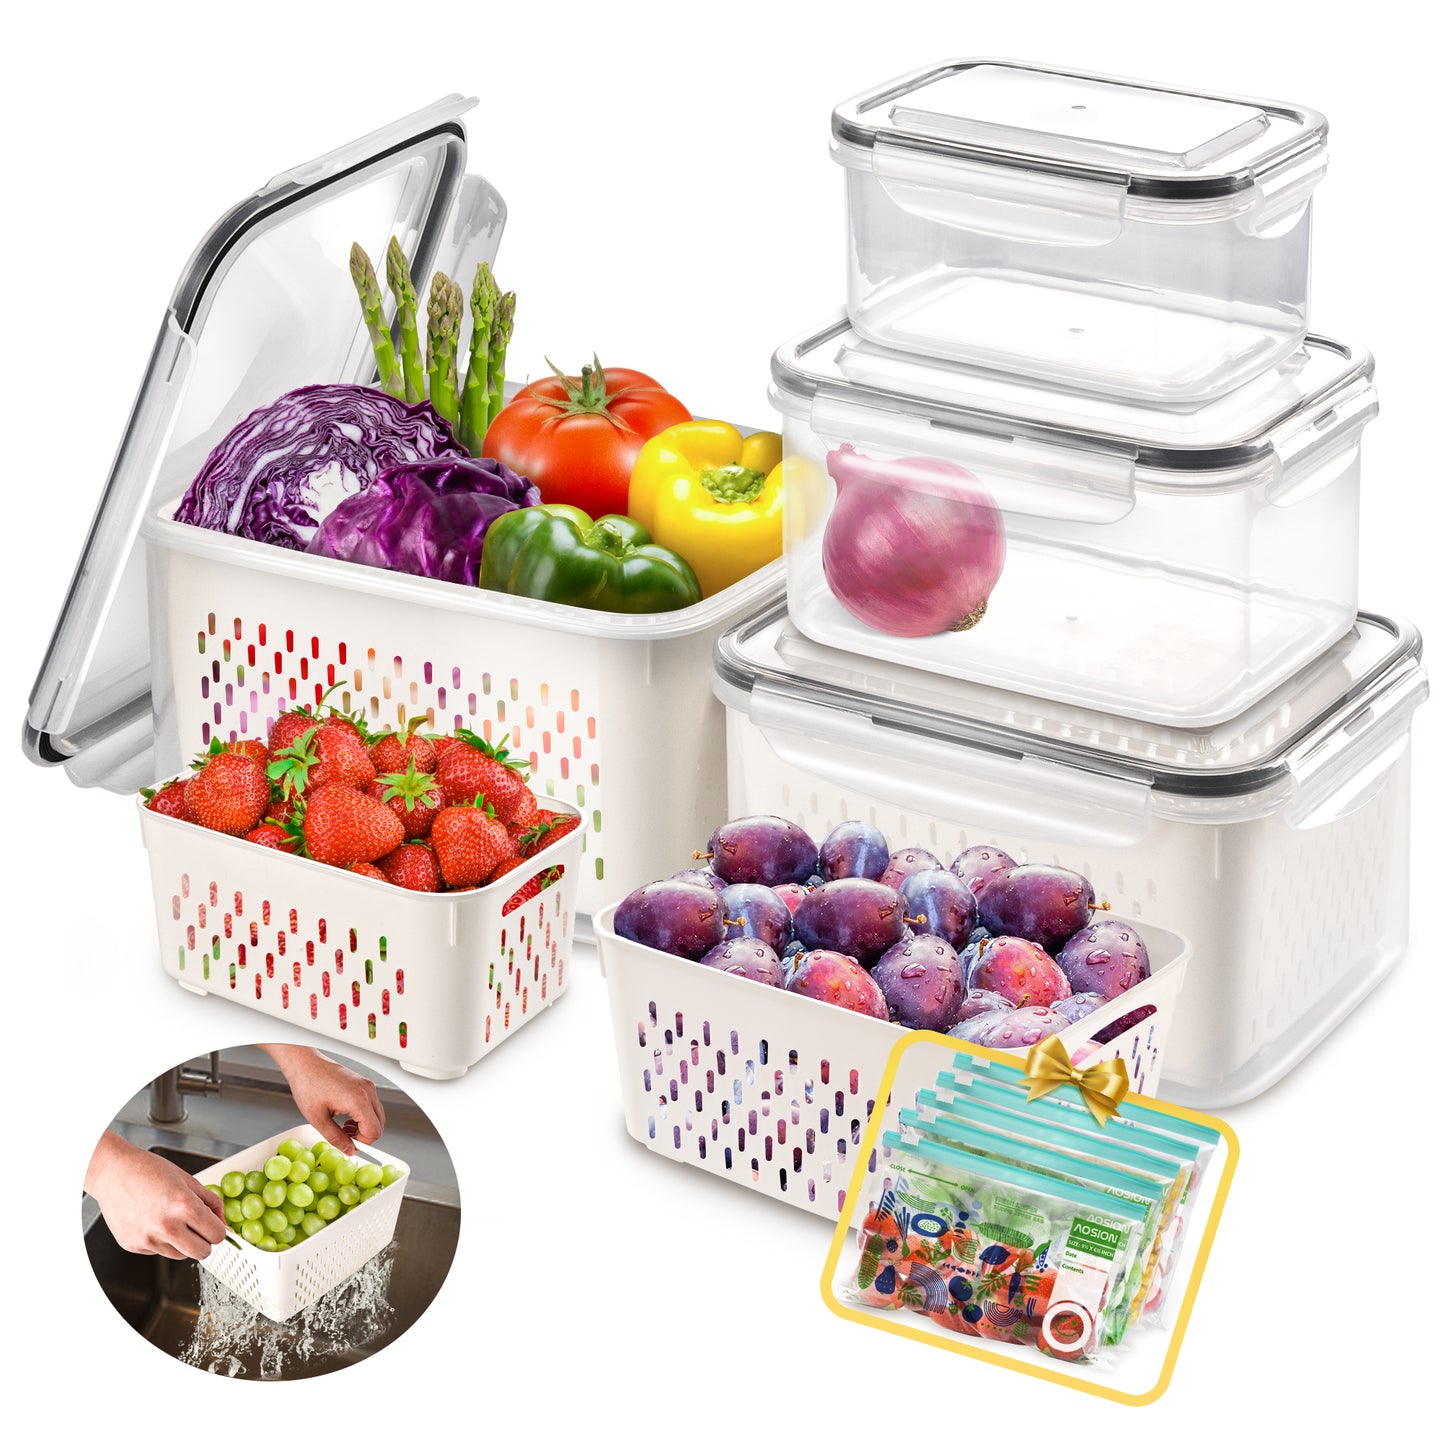  5 PCS Large Fruit Containers for Fridge,Leakproof Food